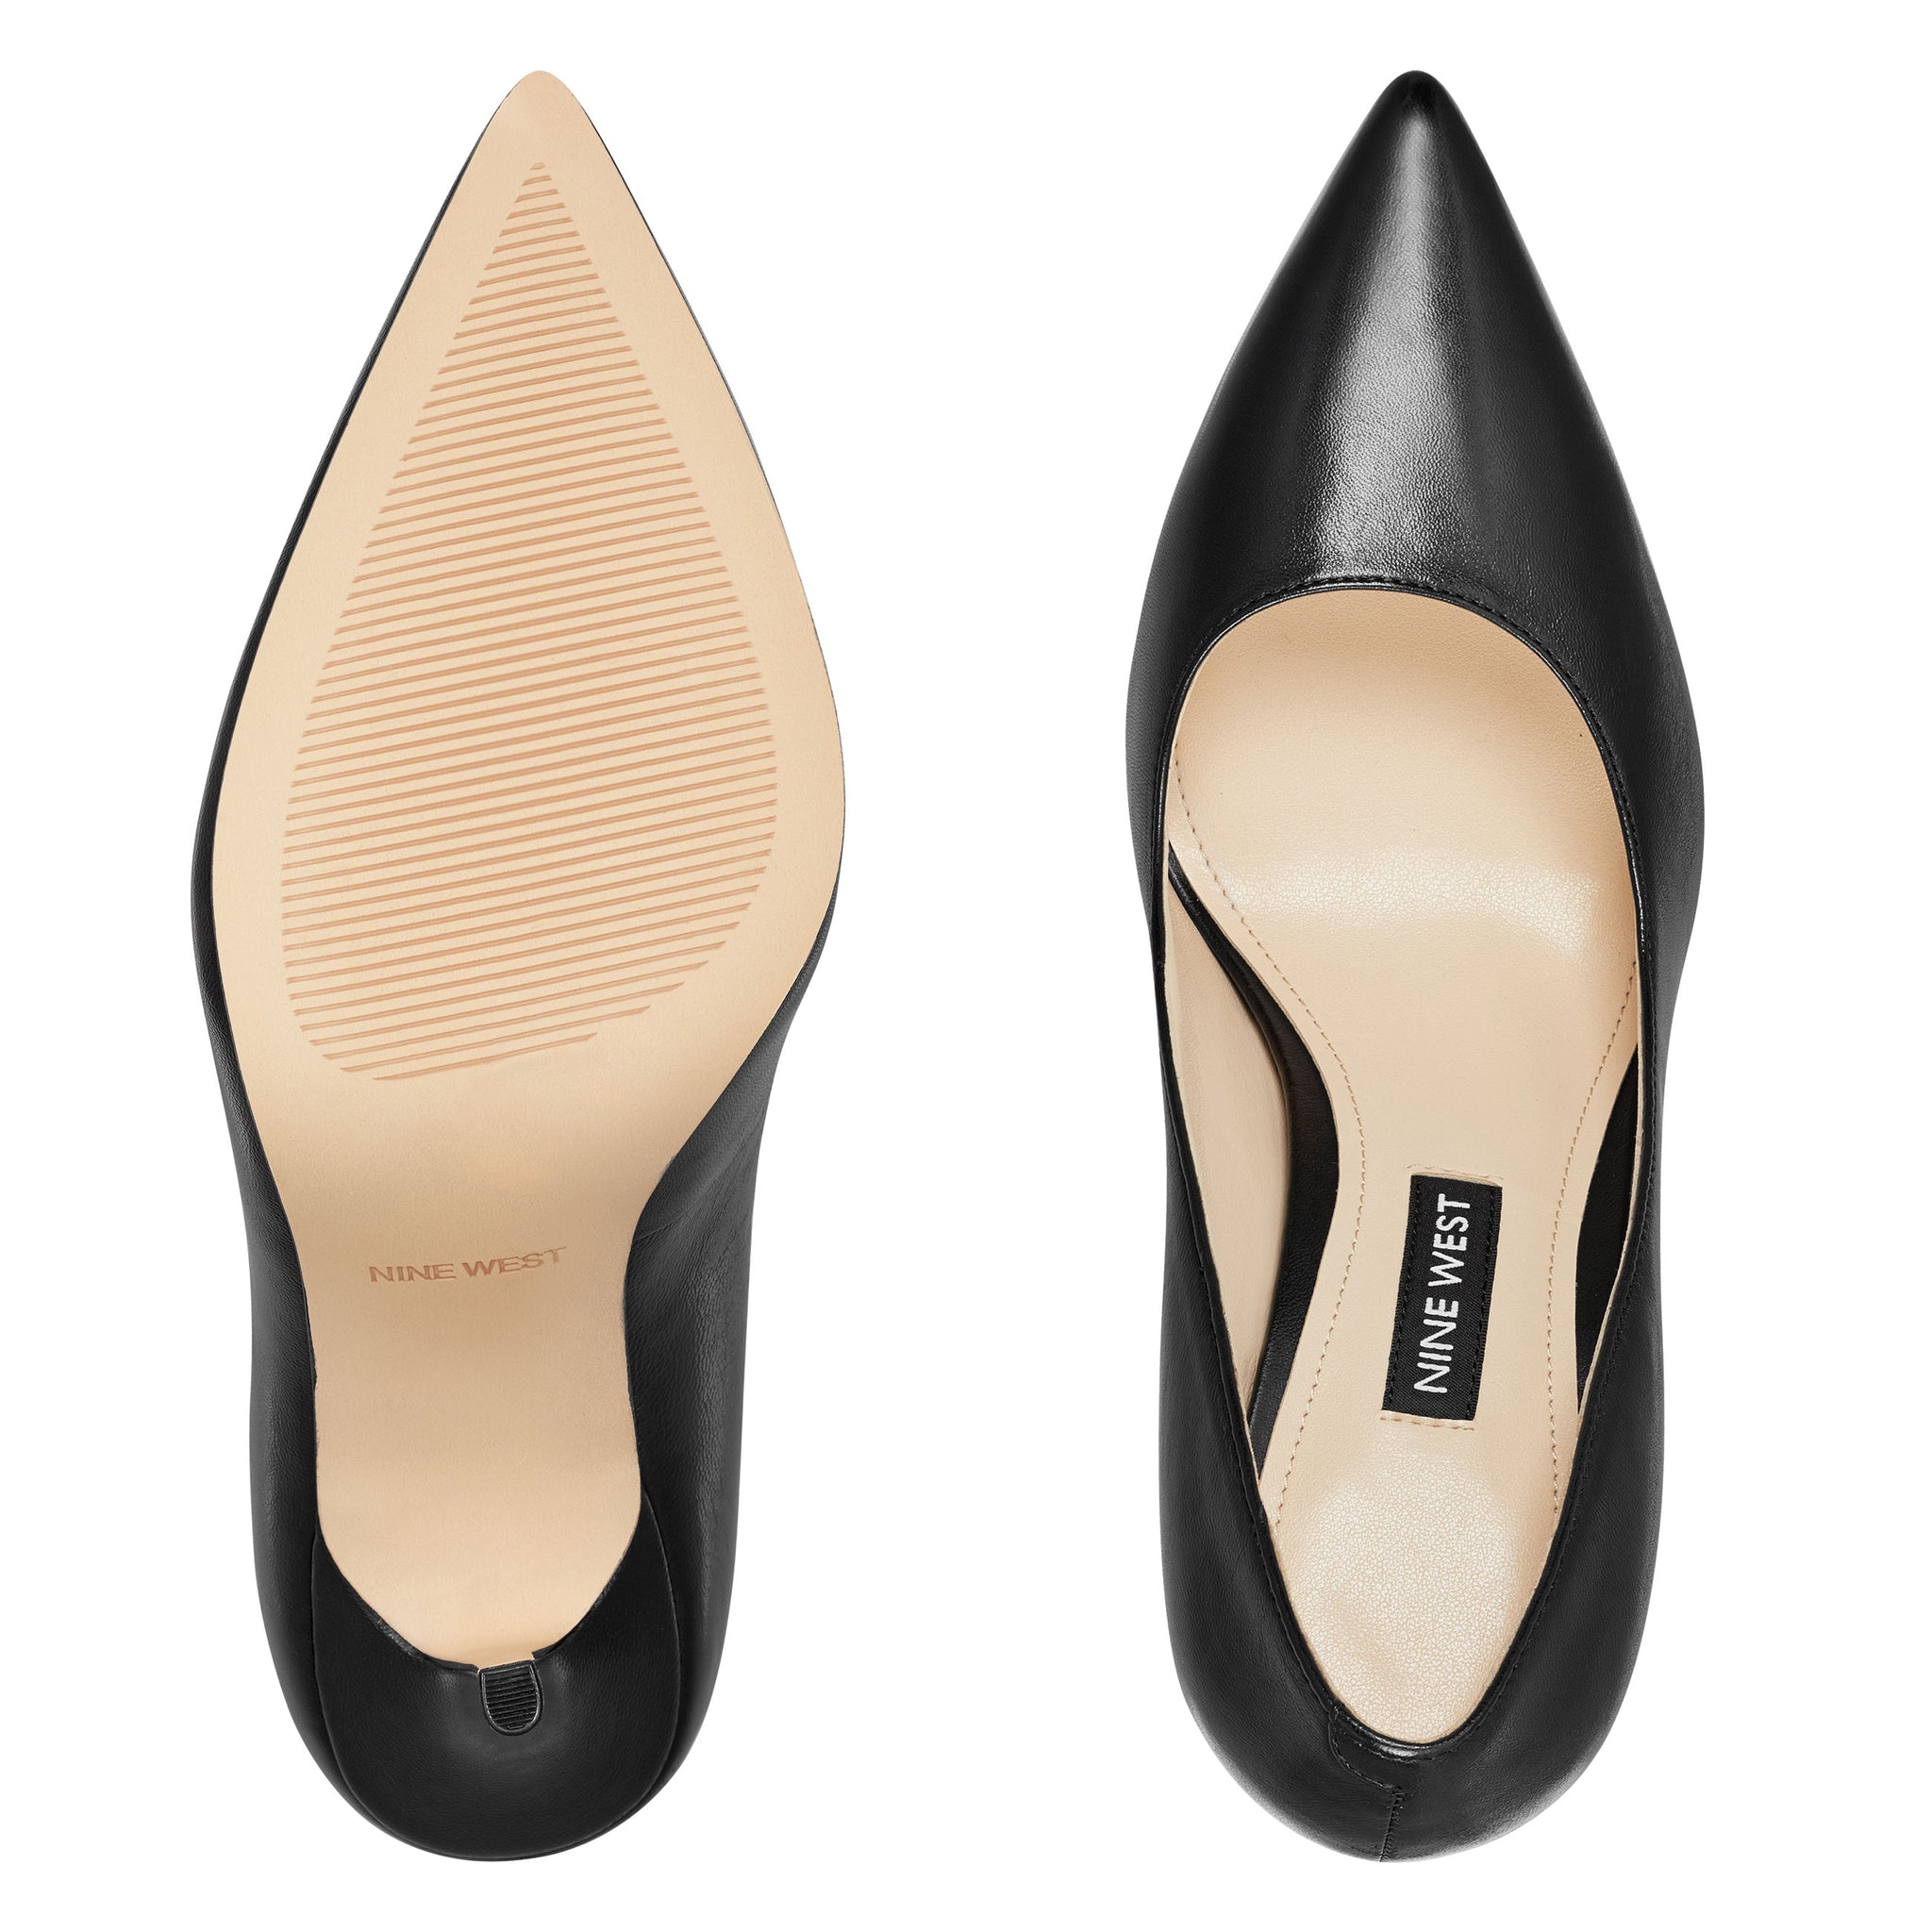 Bliss Pointy Toe Pumps - Nine West